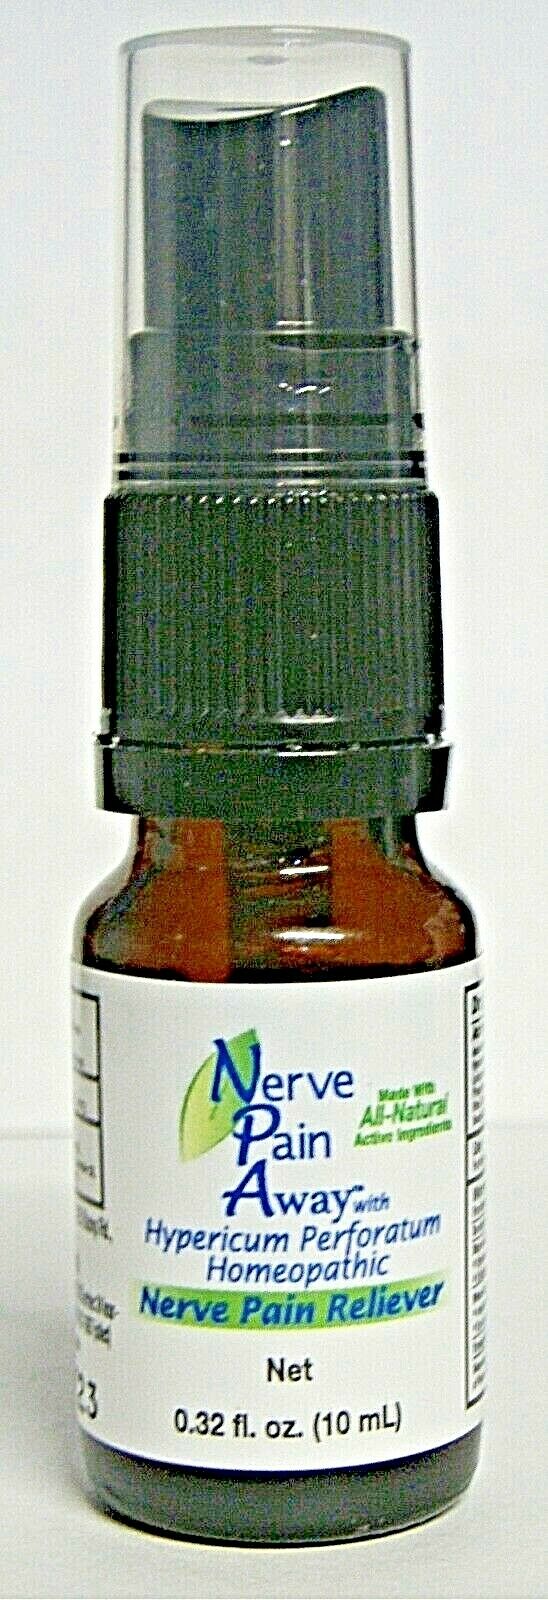 Nerve Pain Away Reliever Hypericum Perforatum Topical Homeopathic .32 Oz Asotv